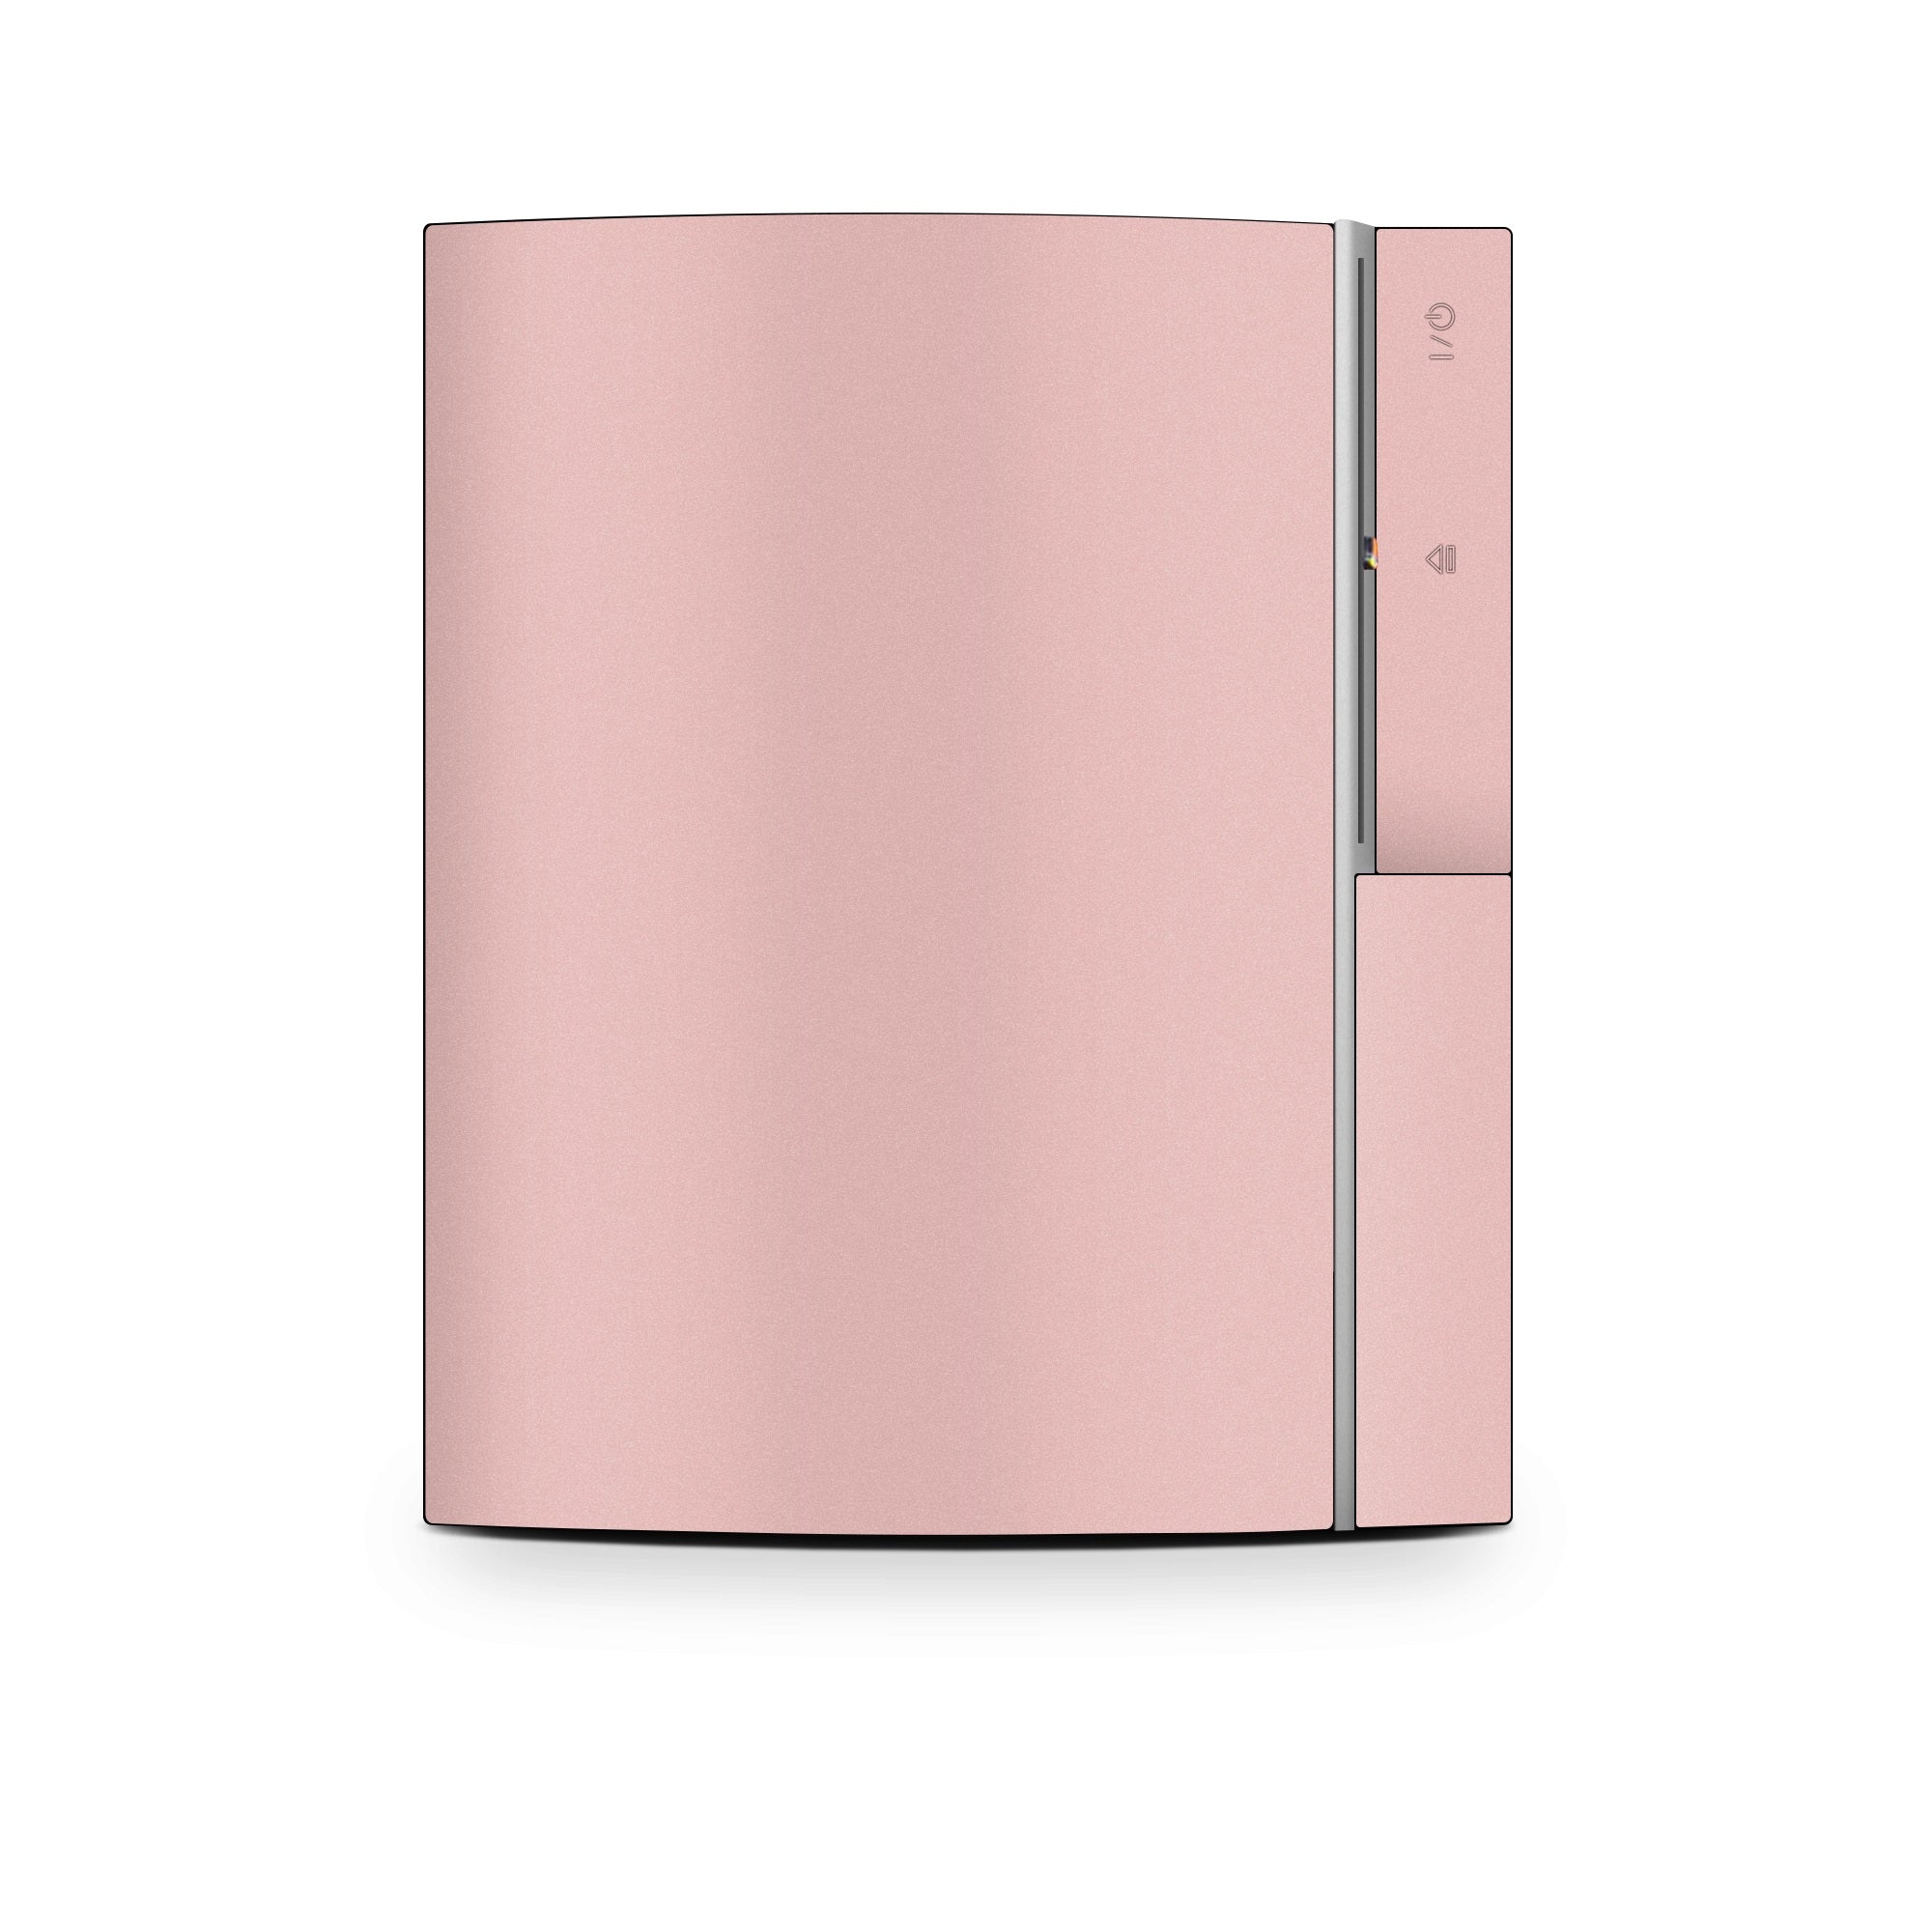 Solid State Faded Rose - Sony PS3 Skin